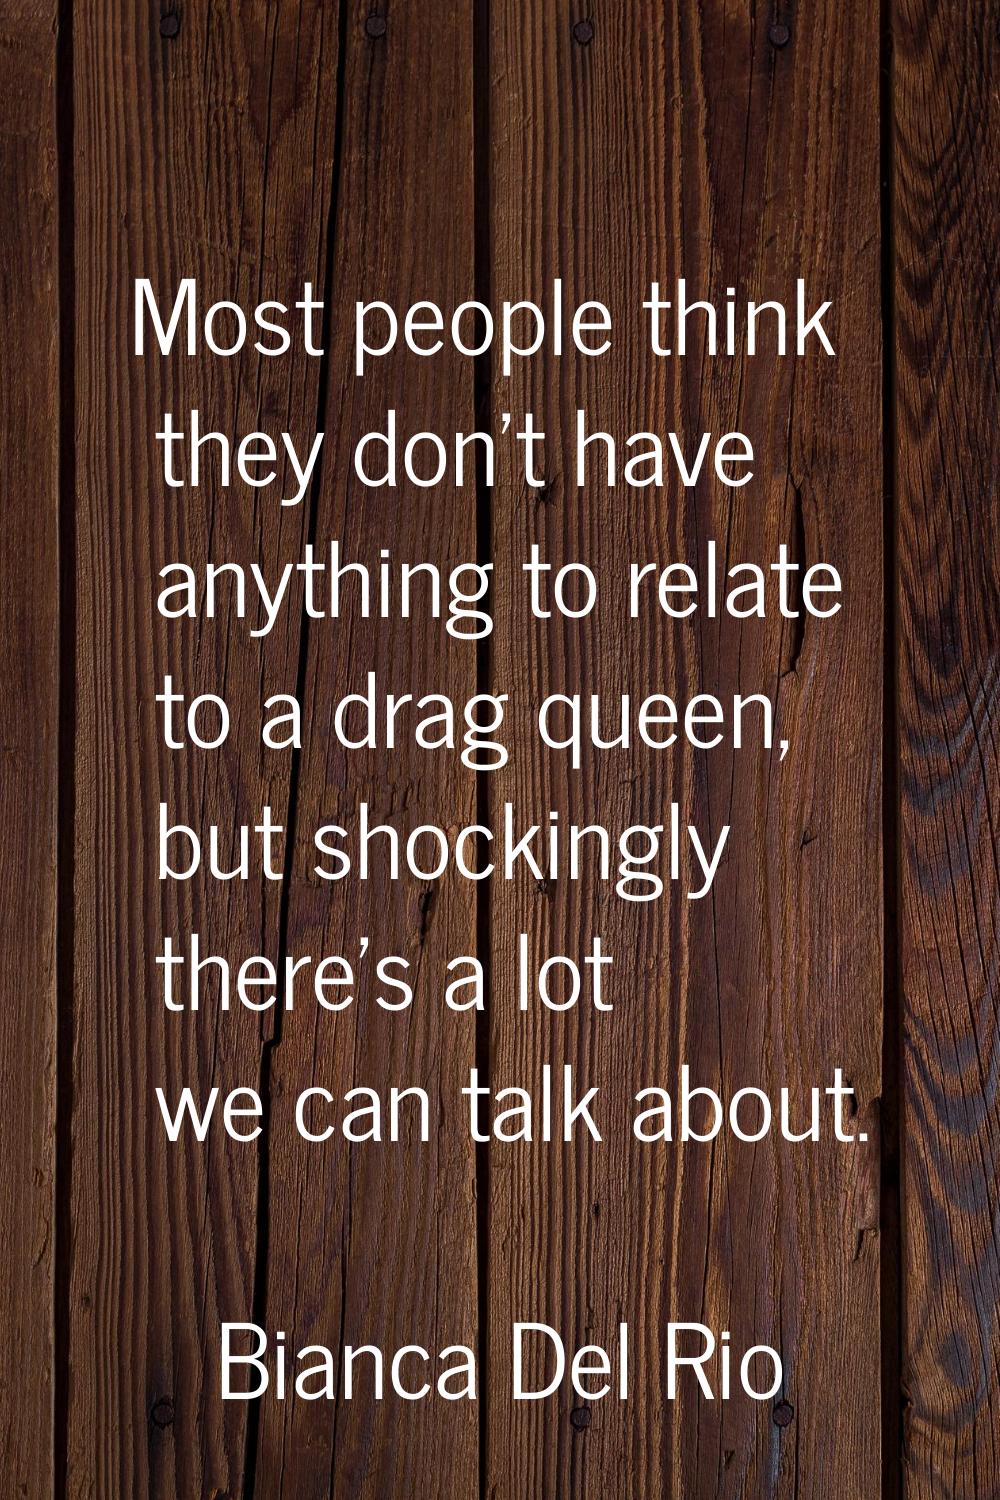 Most people think they don't have anything to relate to a drag queen, but shockingly there's a lot 